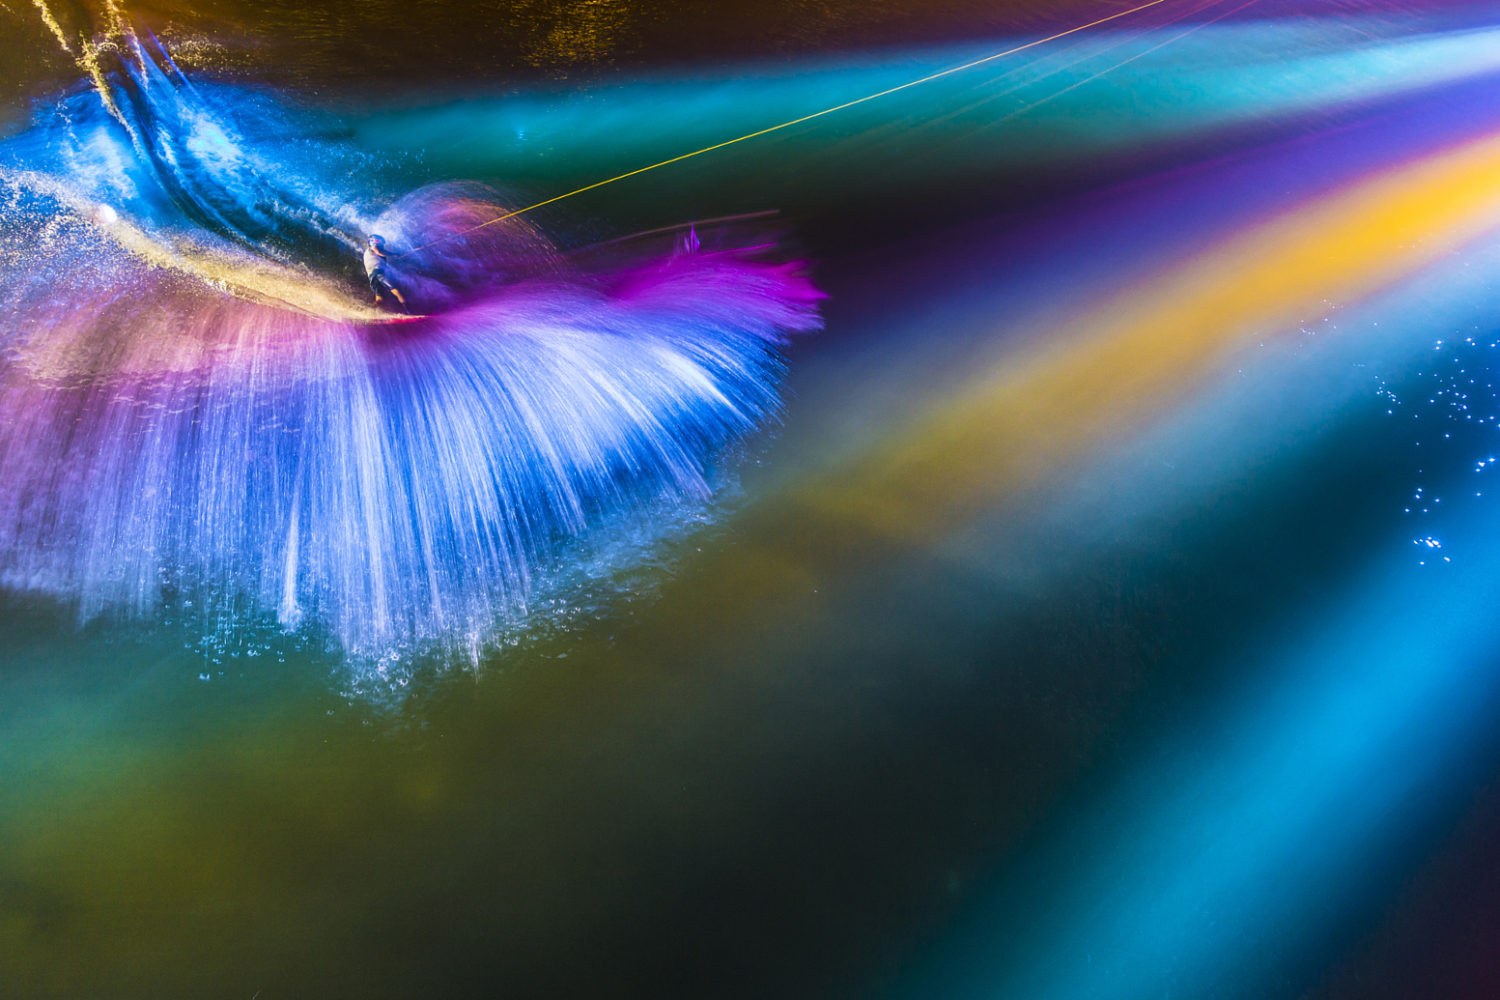 Hummingbird Or Wakeboarder? Get The Story Behind This Surreal Shot